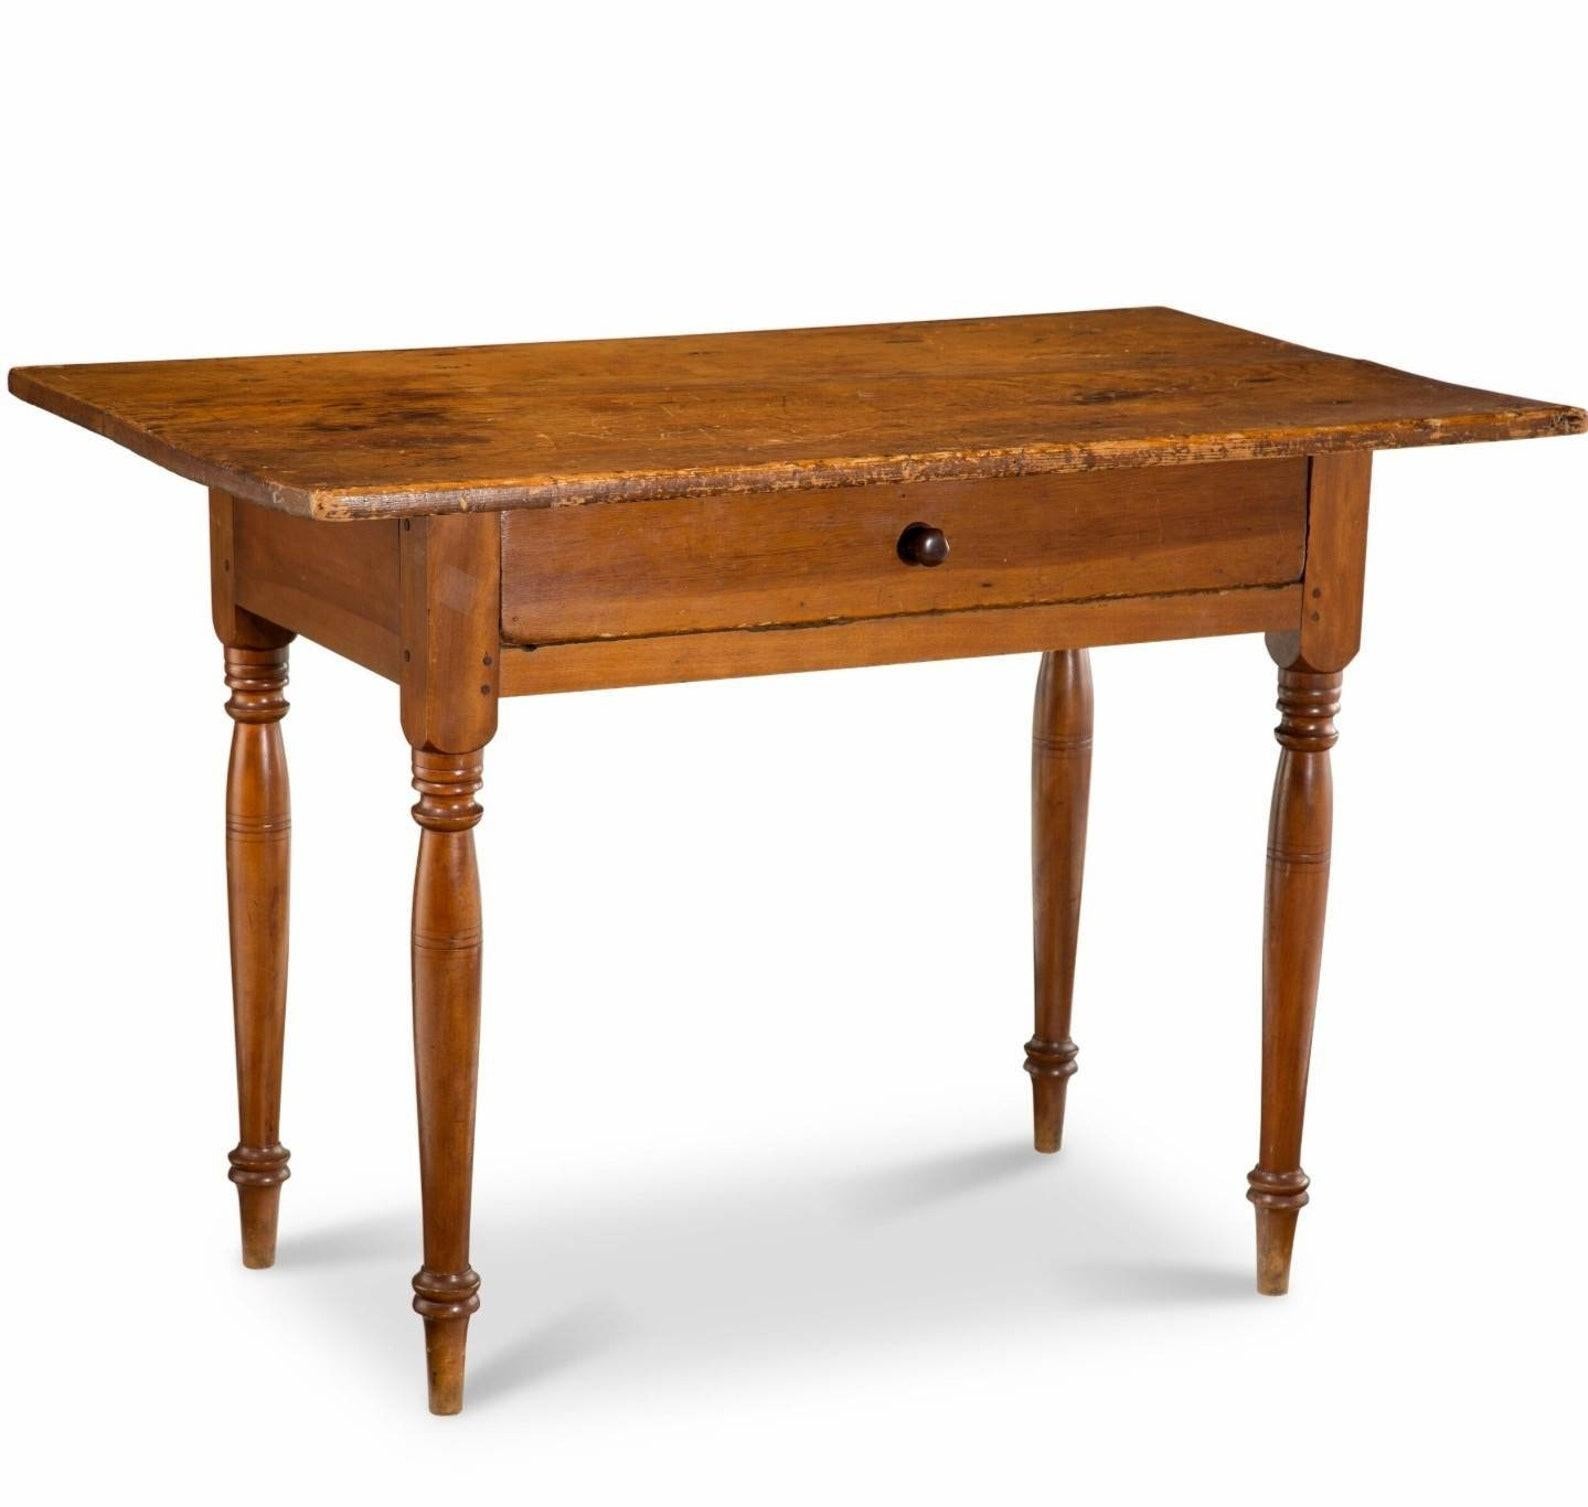 A rare early American single board farm table with attractive warm, rich dark patina.

Hand-crafted in the Northeast United States, possibly New England region, mid-18th century with minor later elements. 

The scarce American Country pine